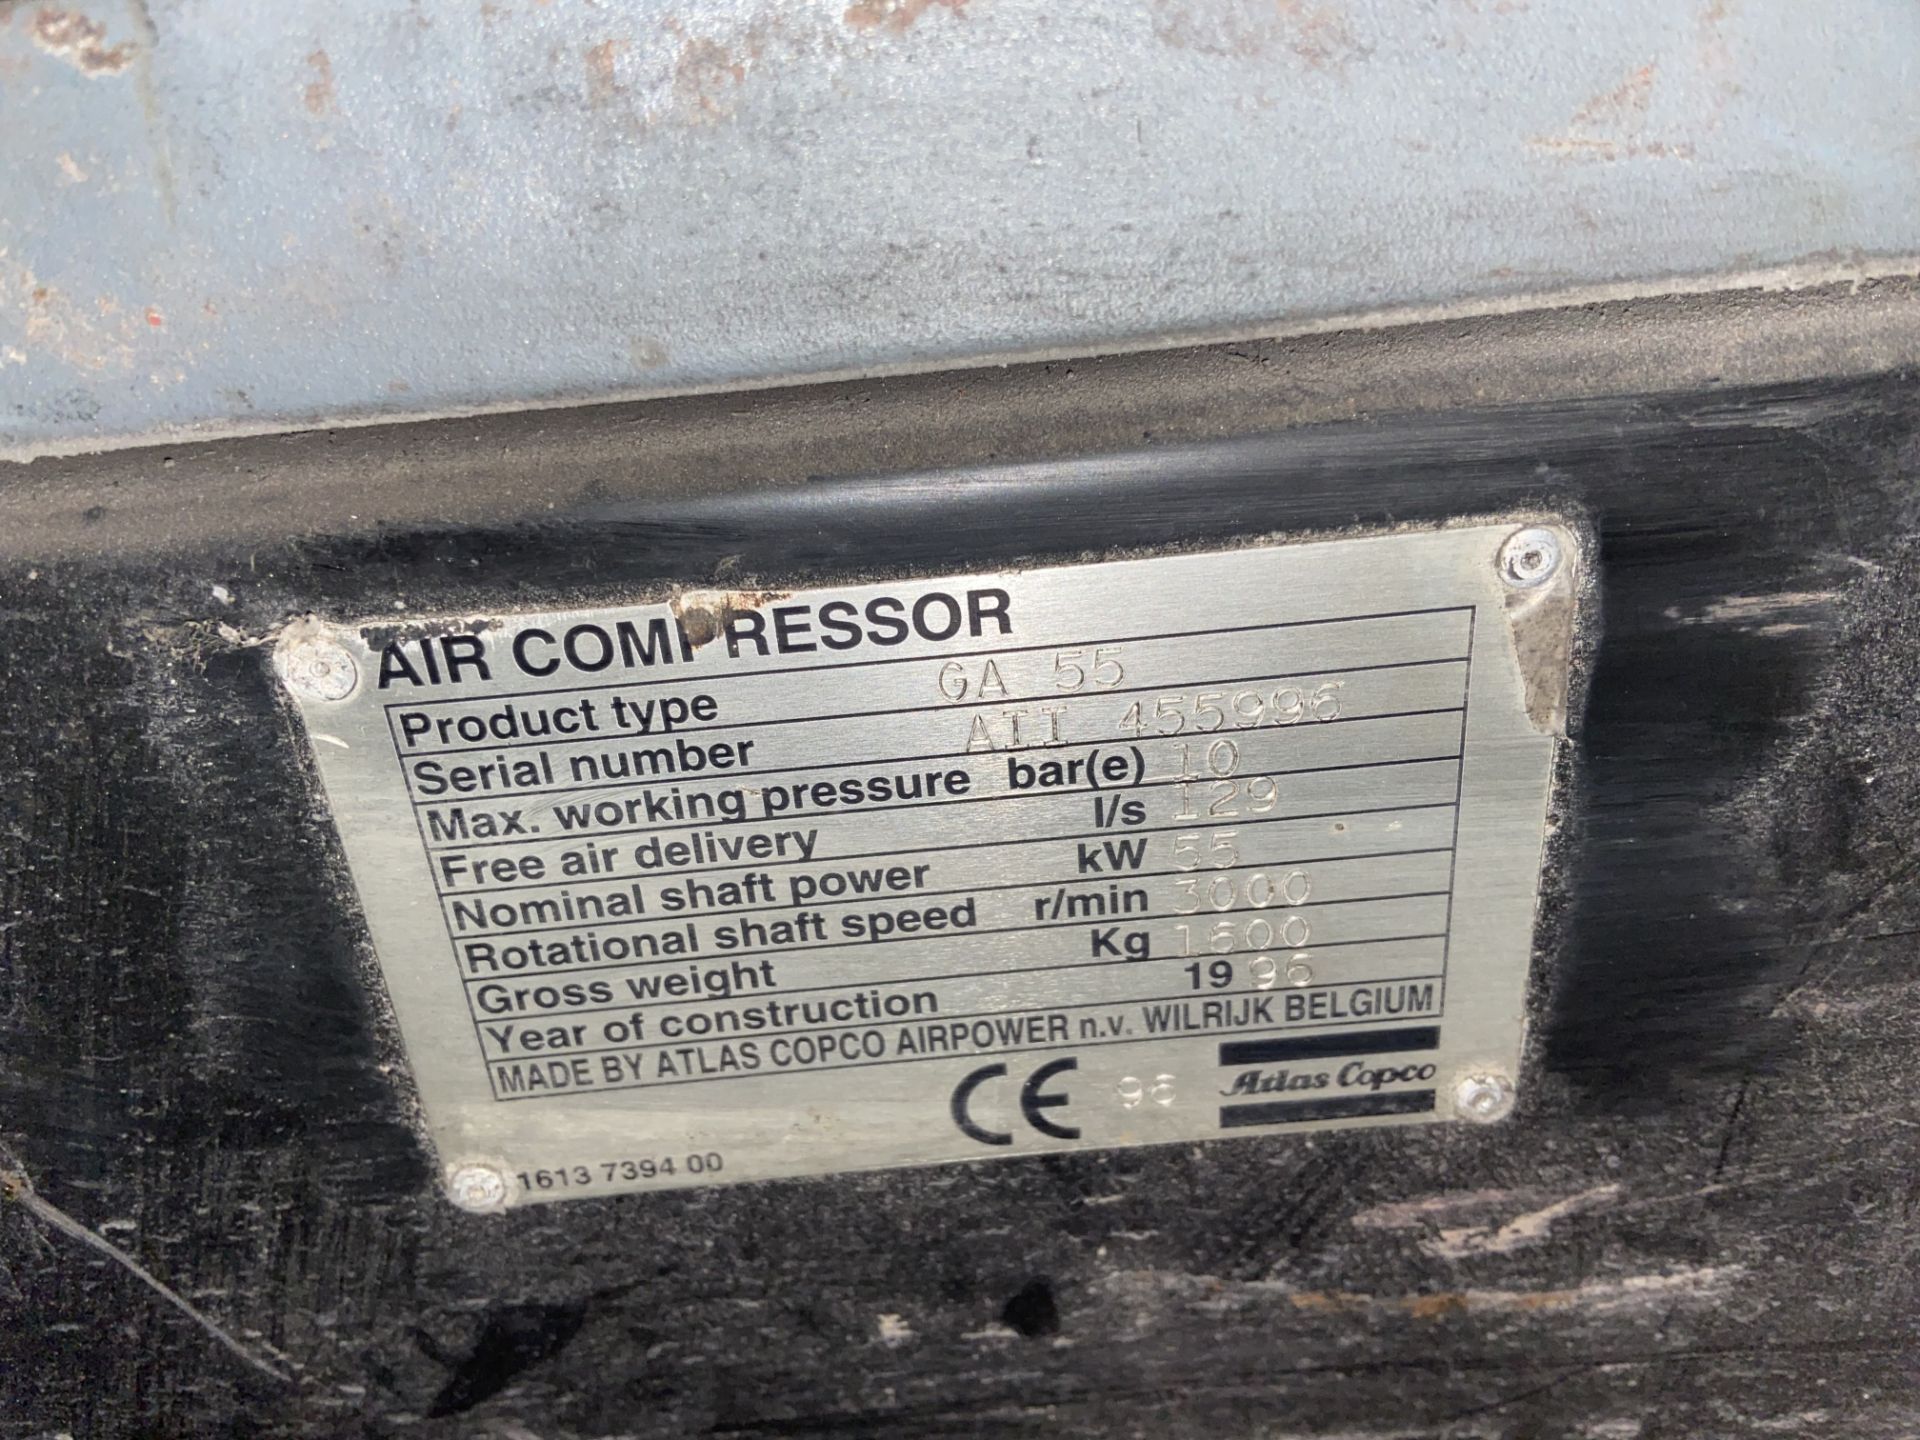 Atlas Copco GA55 PACKAGED AIR COMPRESSOR, serial no. A11455996, year of manufacture 1996 Please read - Image 3 of 3